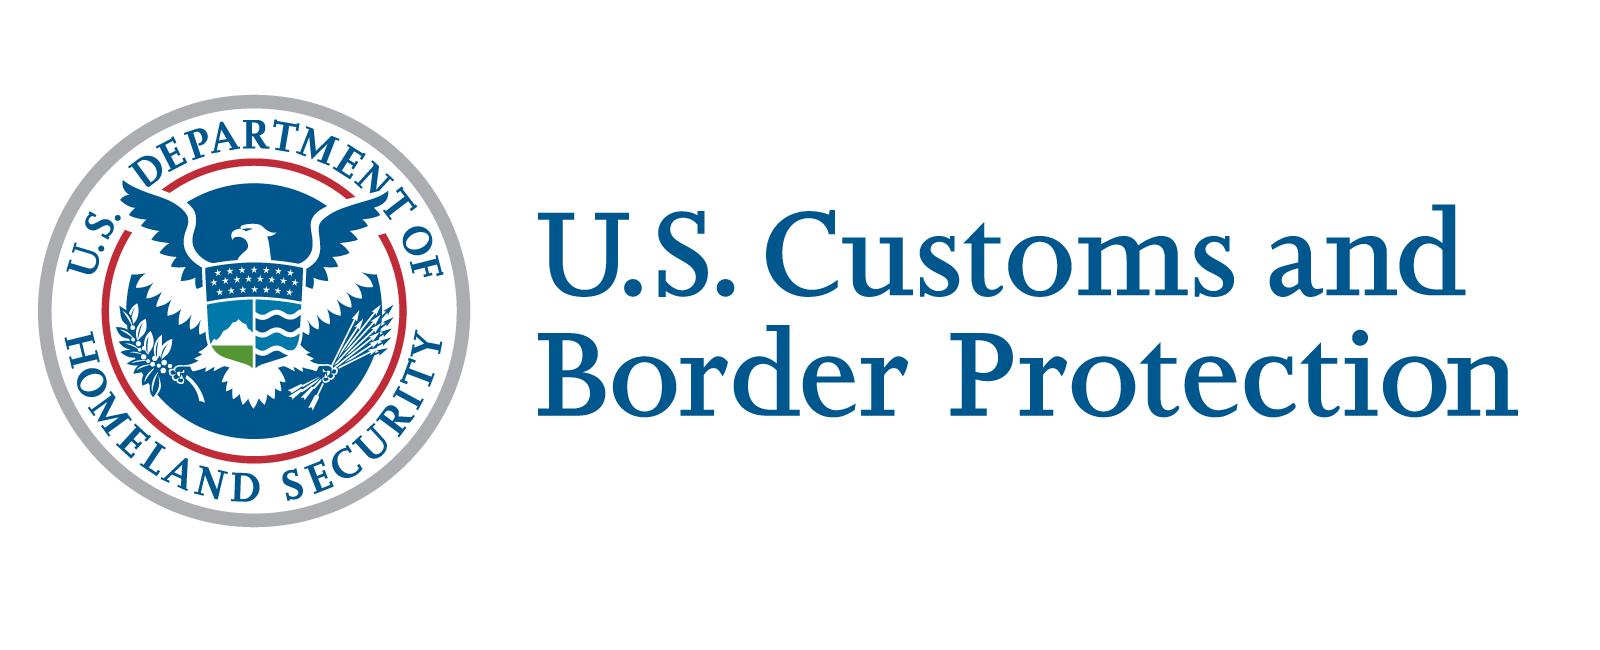 Customs and Border Patrol Logo - 18F: Digital service delivery | How the U.S. Customs and Border ...